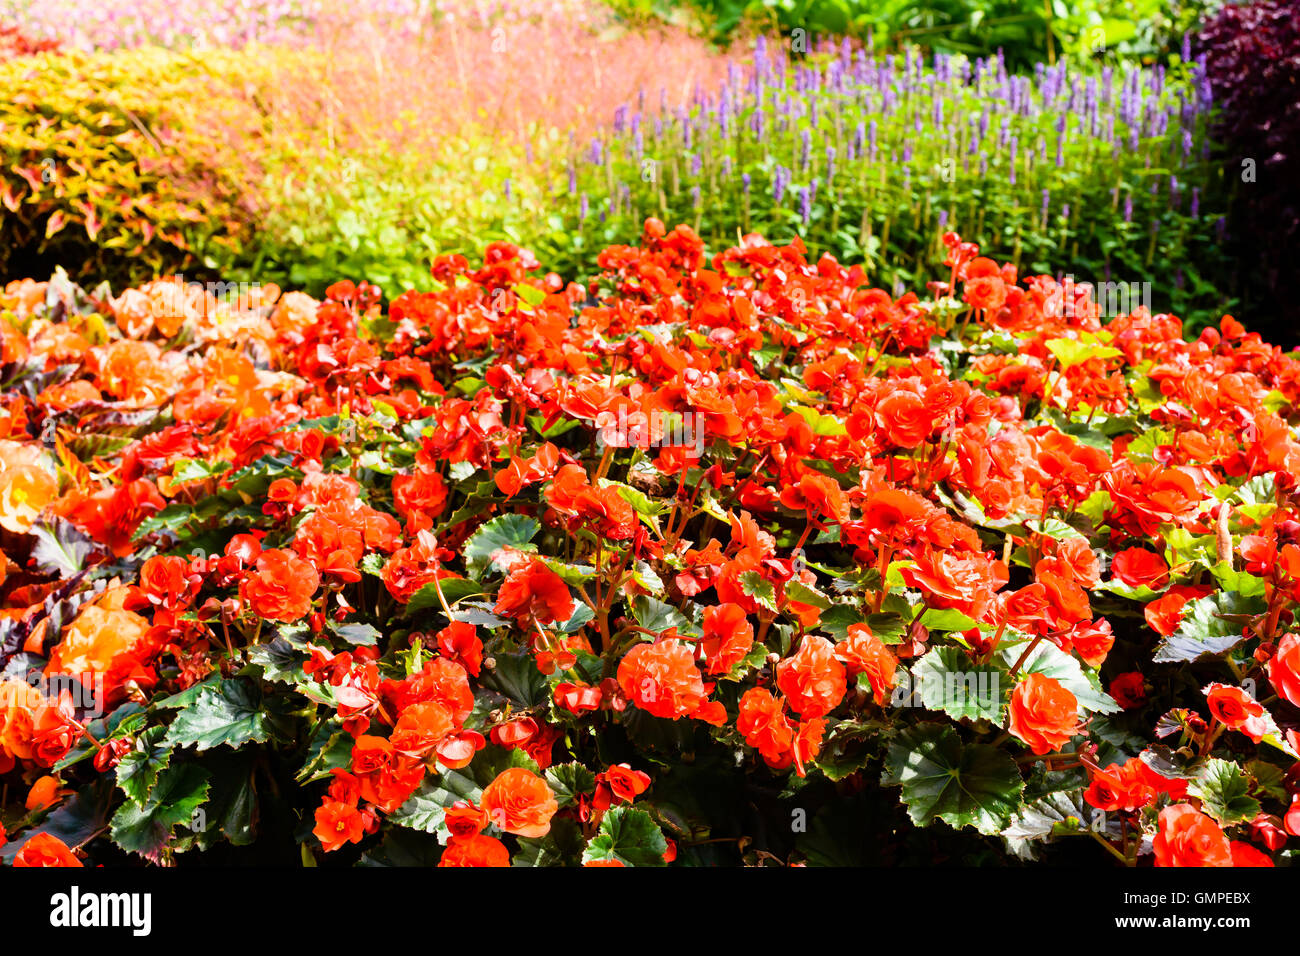 Orange red Begonia cultivar in ornamental flowerbed. Other flowers in the background. Stock Photo